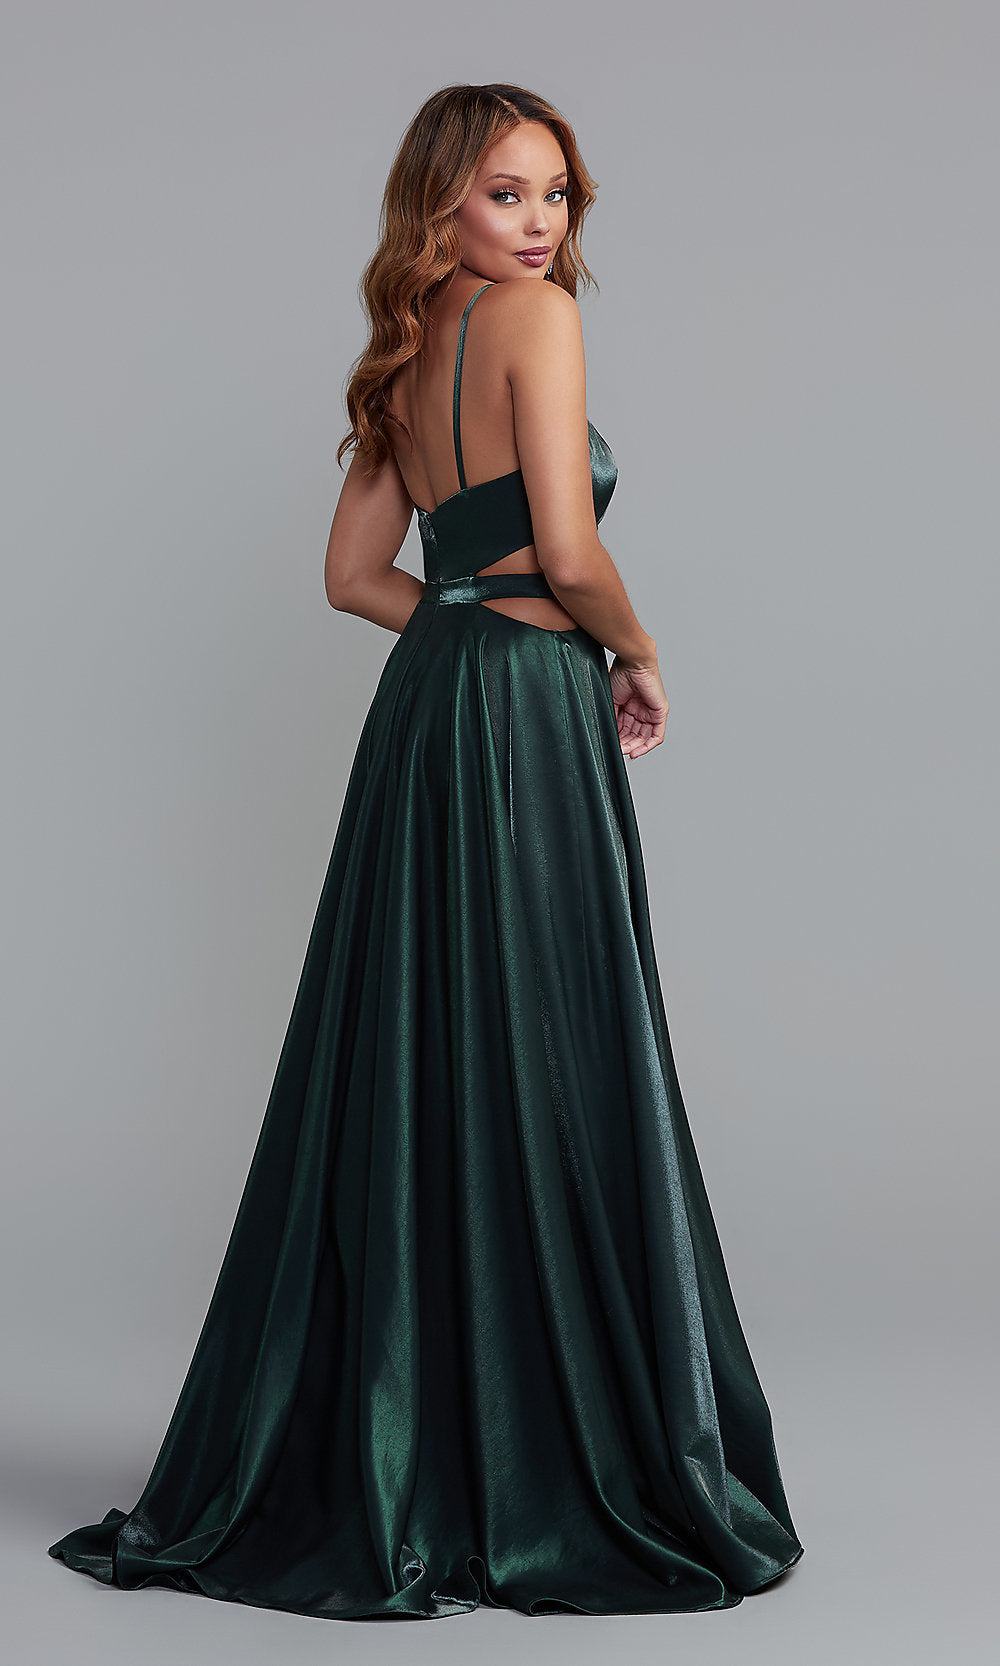  Long Shimmer Formal Prom Dress with Side Cut Outs